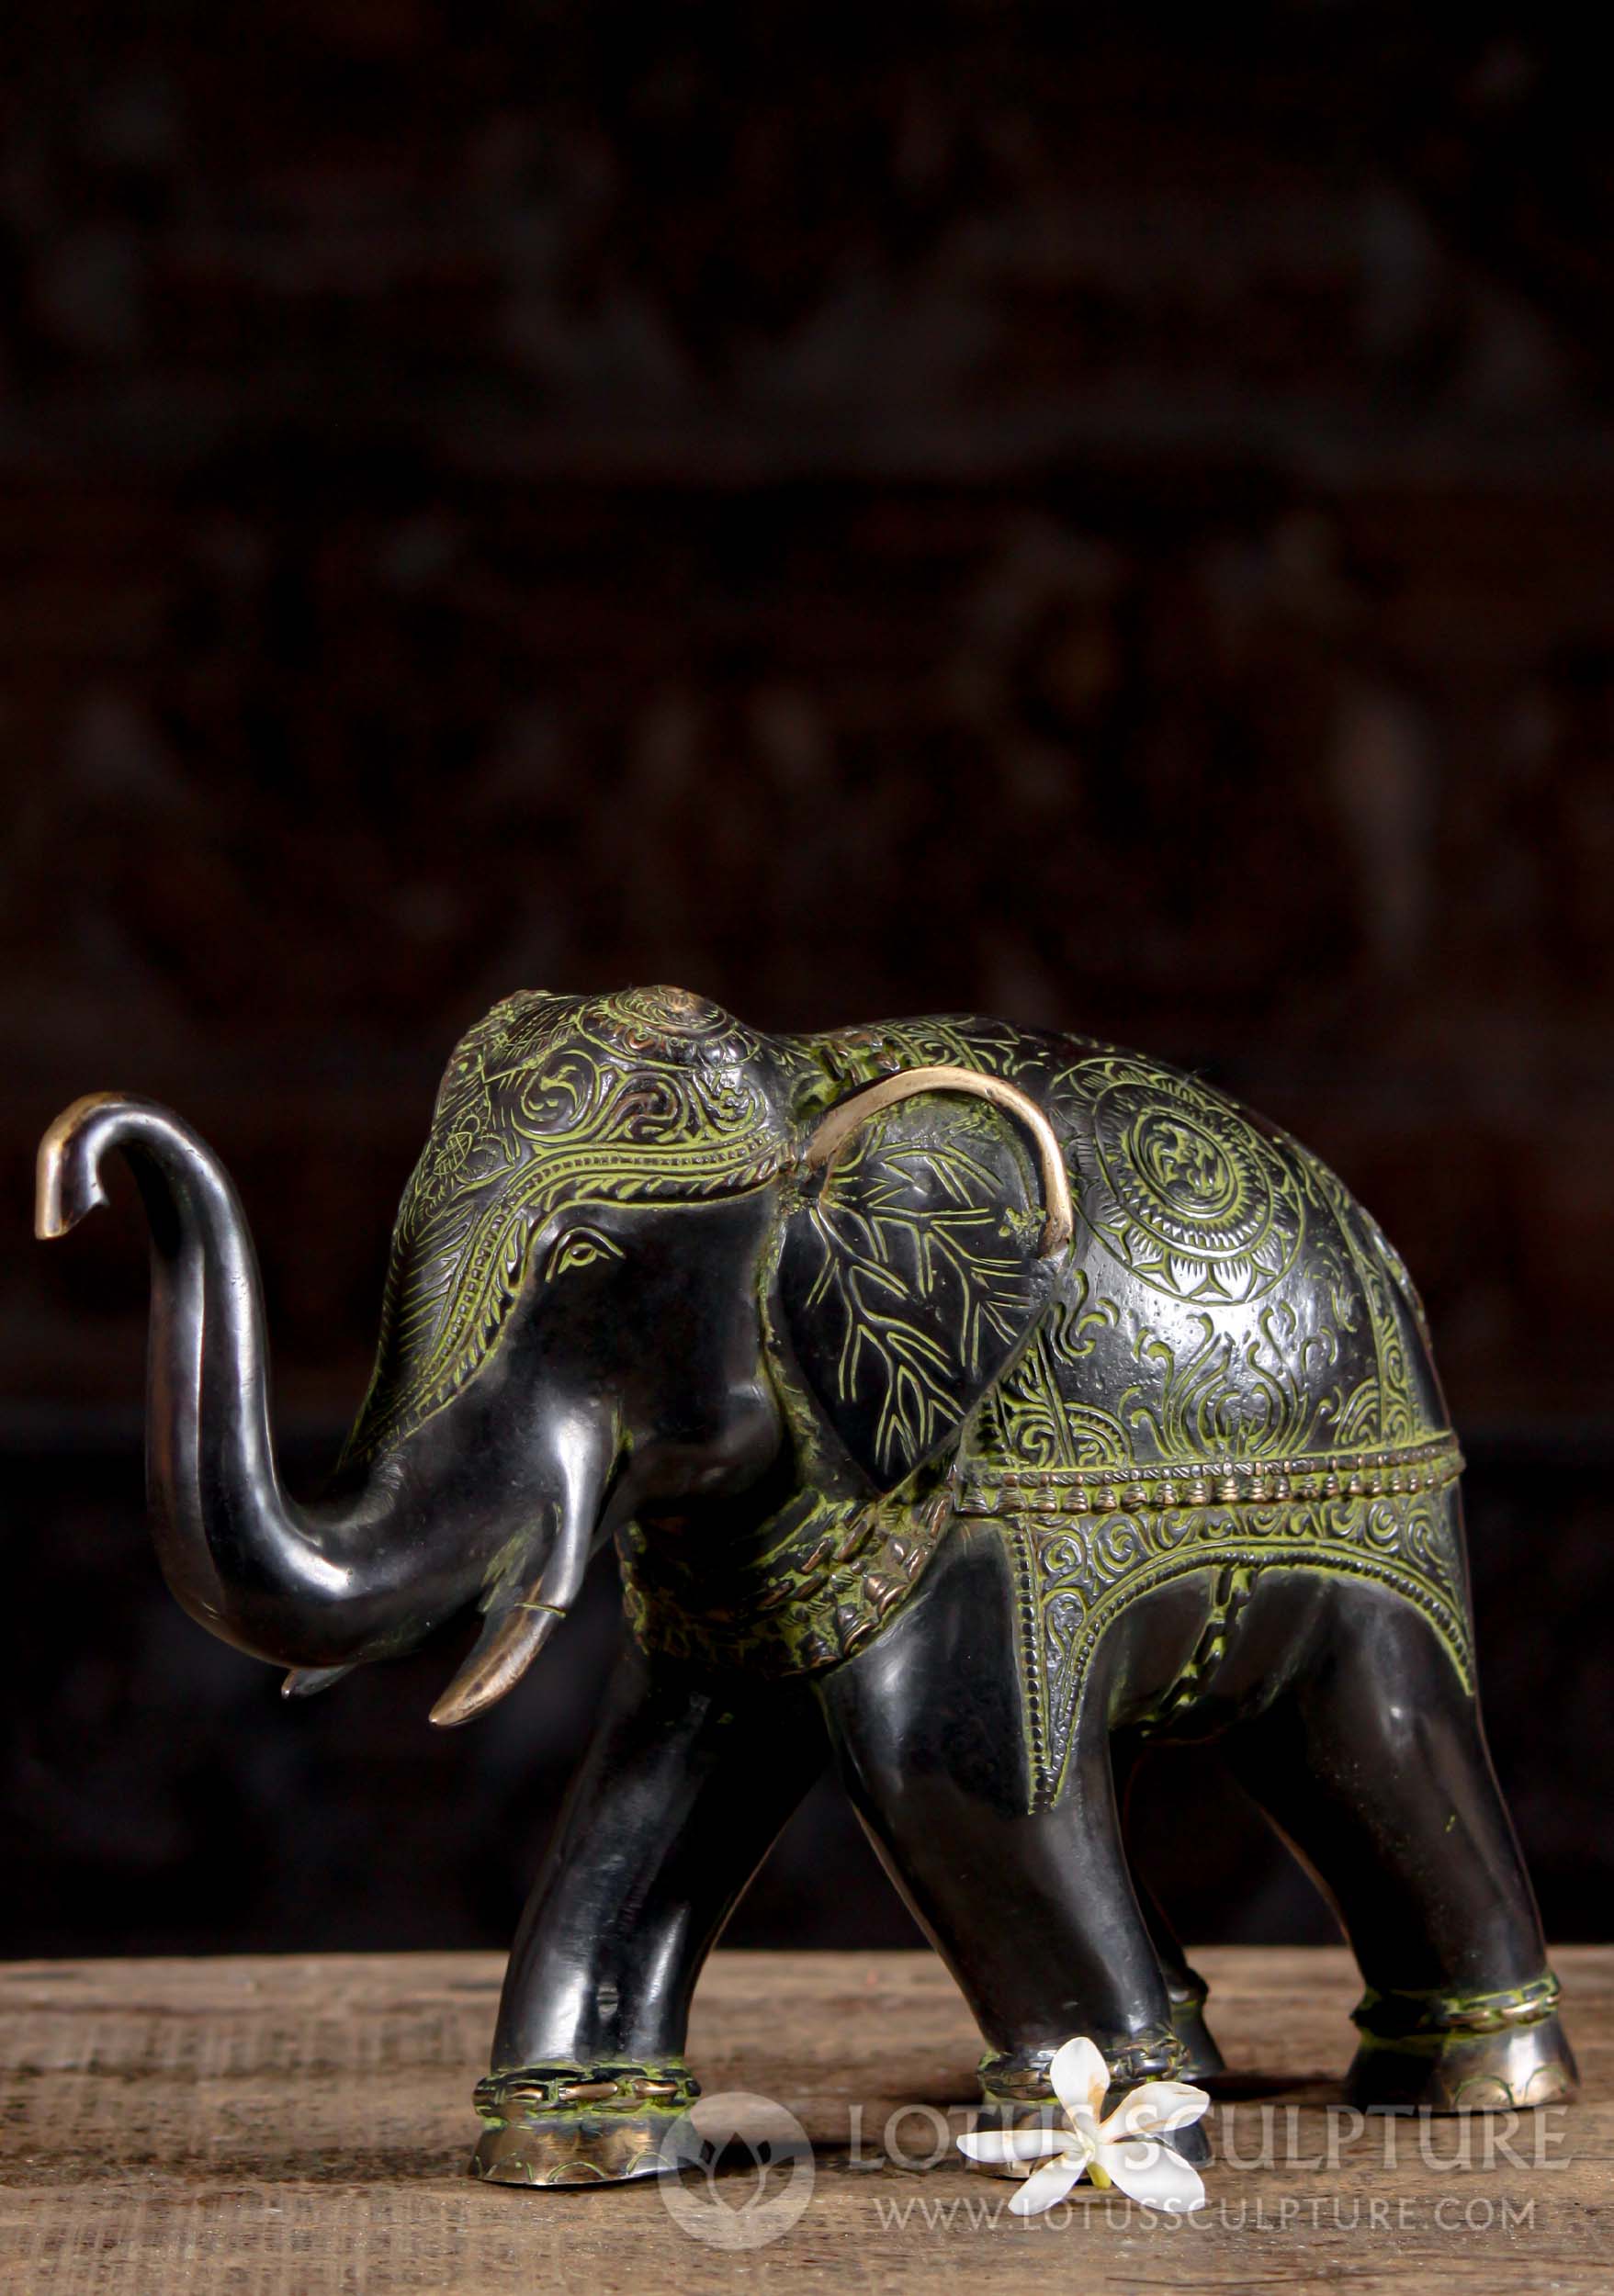 Brass Indian Elephant Statue with Decorations on Trunk & Head with Trunk  Raised for Good Luck 8